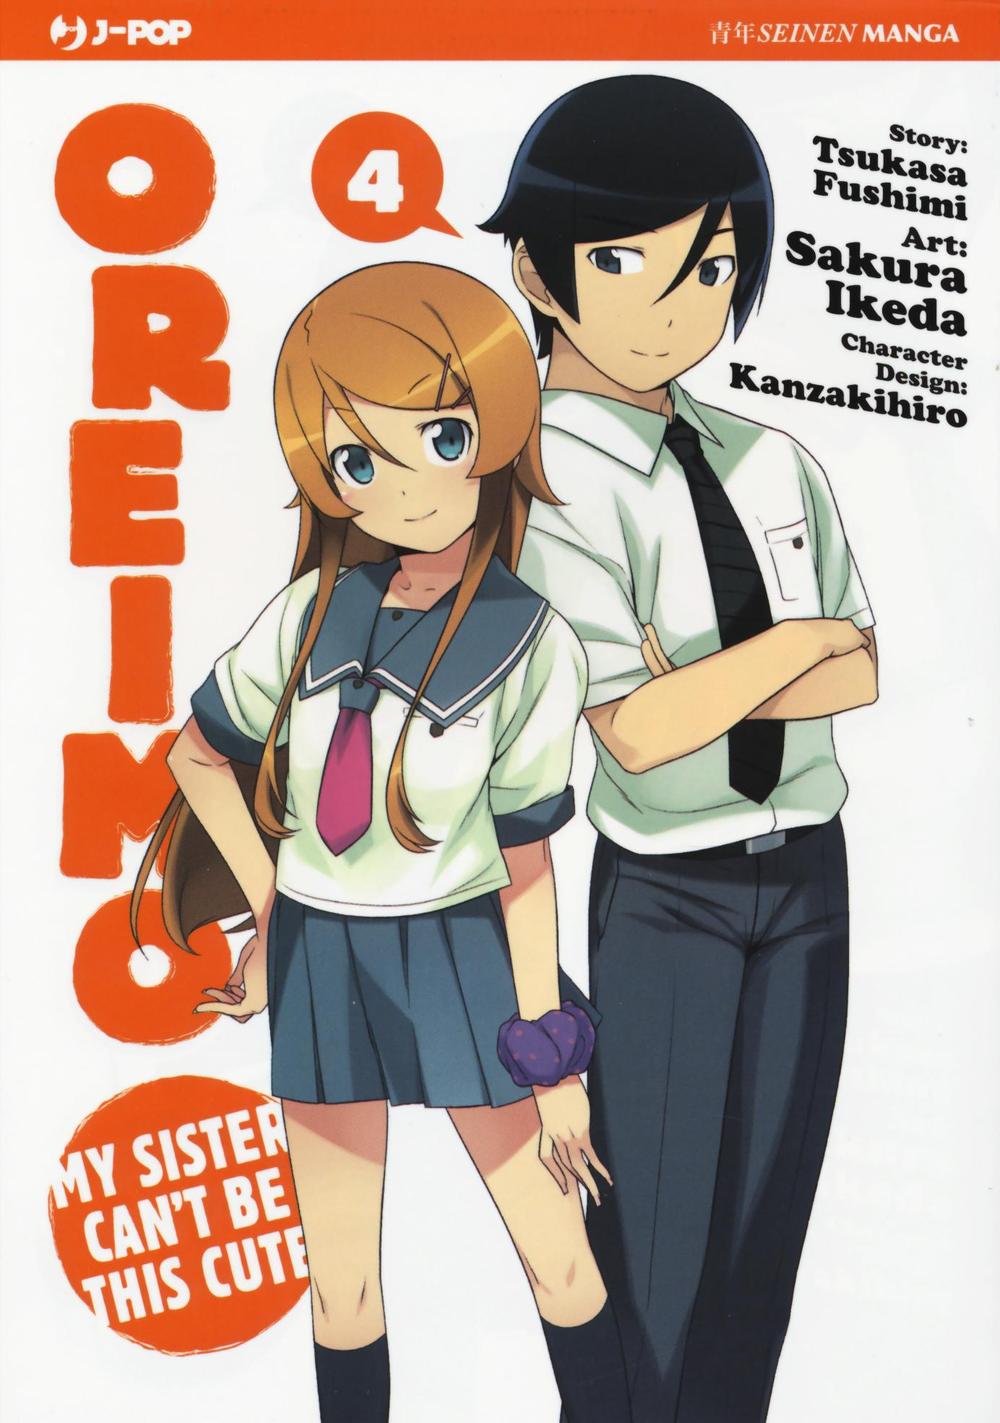 Oreimo. My sister can't be this cute. Vol. 4